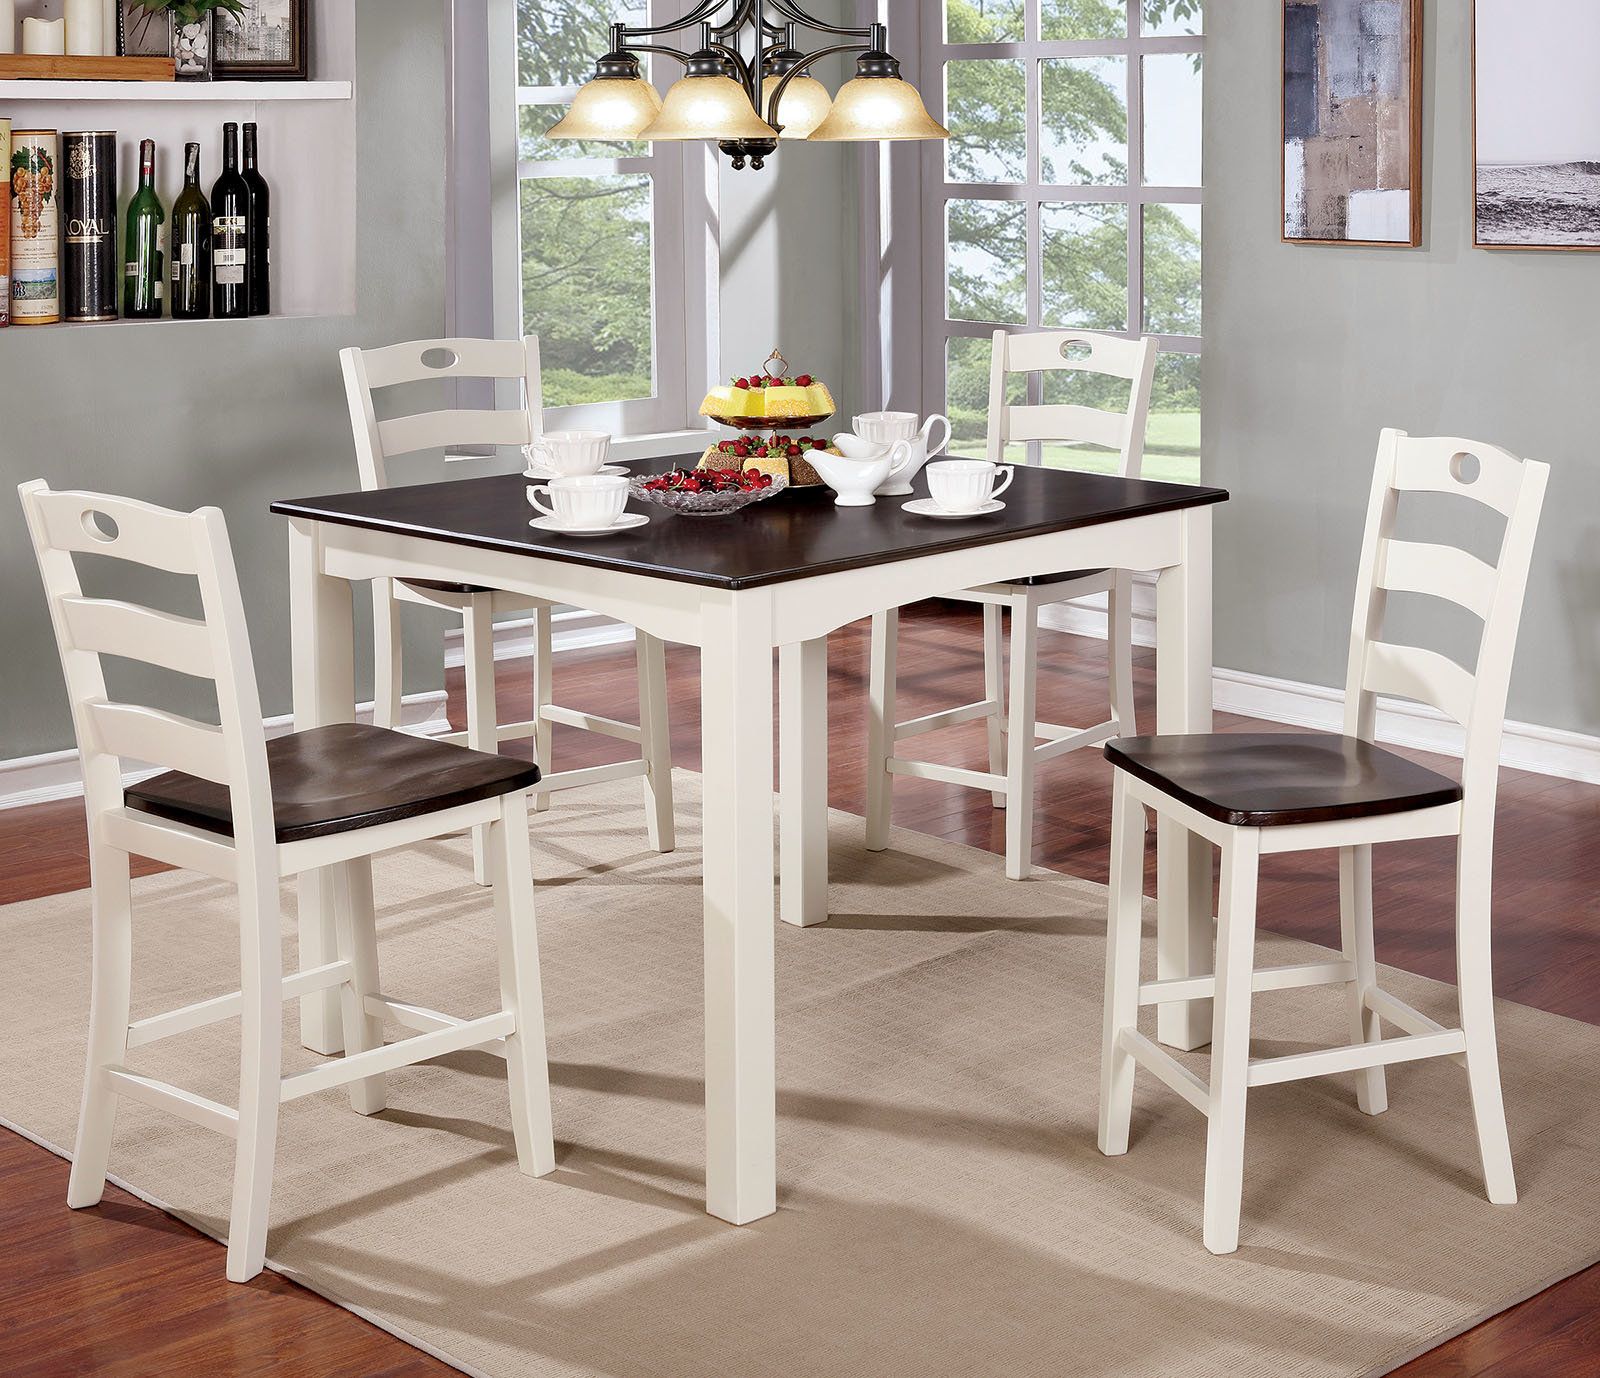 Details About Red Barrel Studio Harkins Wooden 5 Piece Counter Height  Dining Table Set Intended For Best And Newest Hanska Wooden 5 Piece Counter Height Dining Table Sets (Set Of 5) (View 2 of 20)